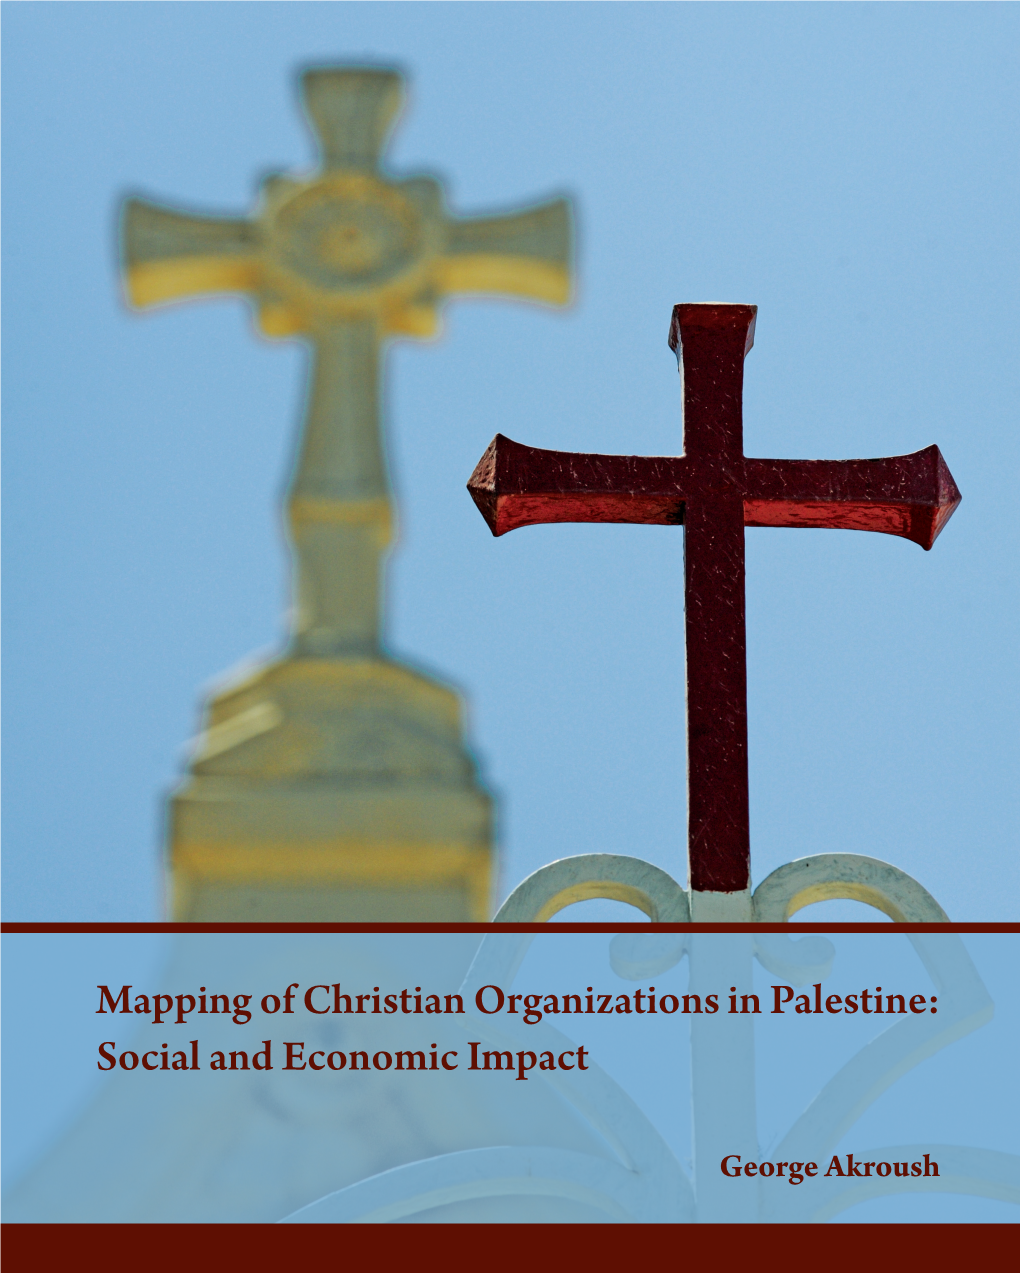 Mapping of Christian Organizations in Palestine: Social and Economic Impact